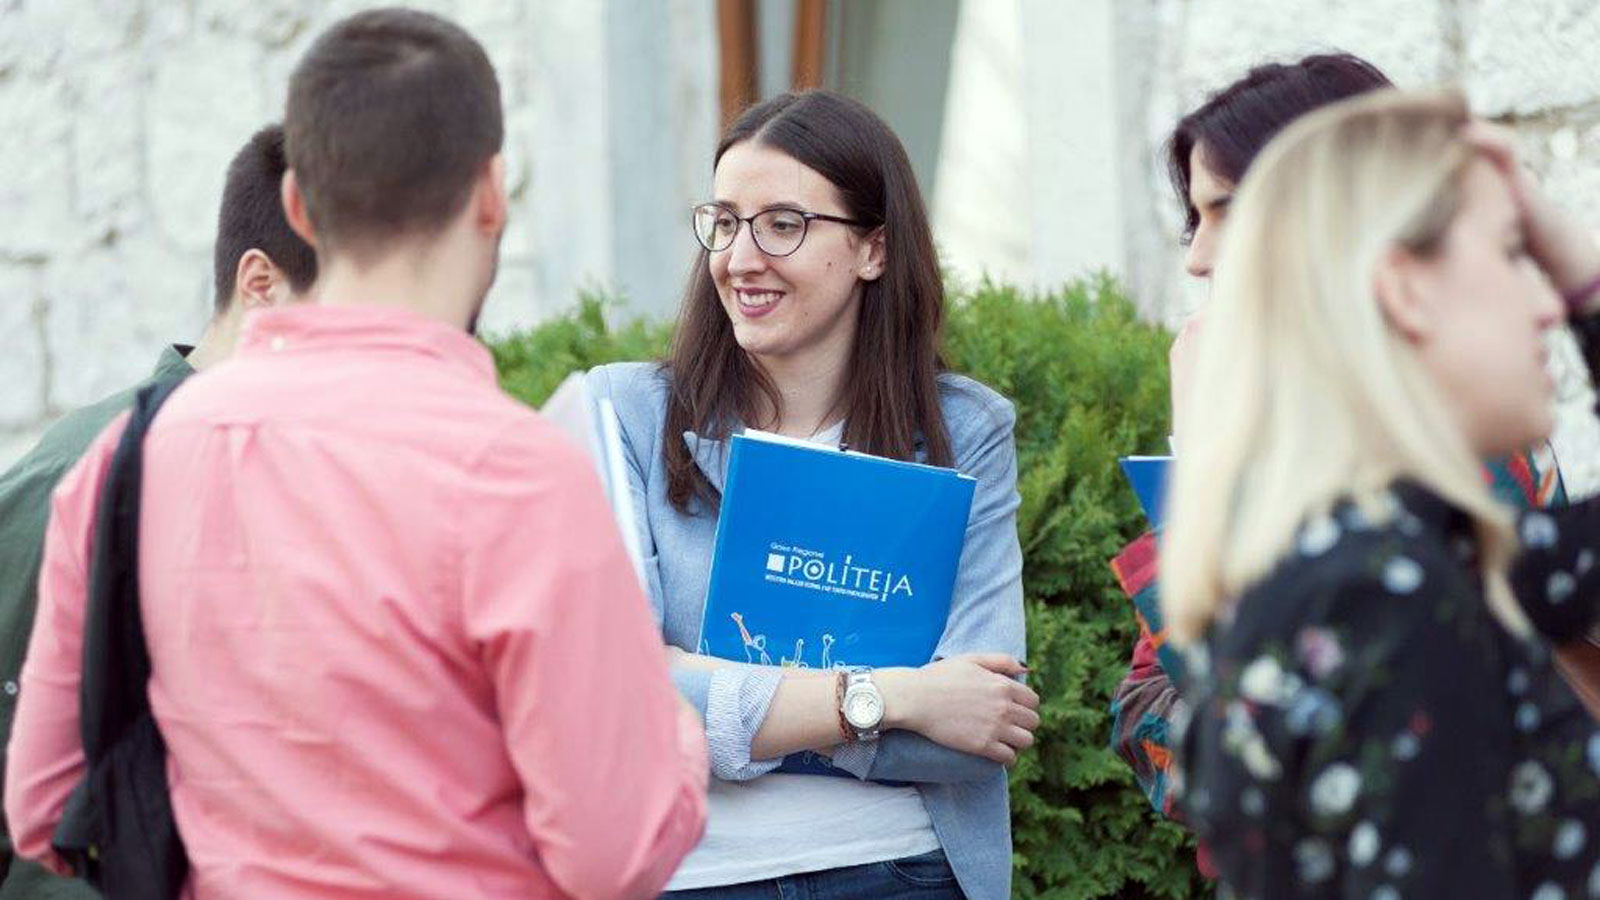 Students from Western Balkans Ready to Actively Engage in Reforms